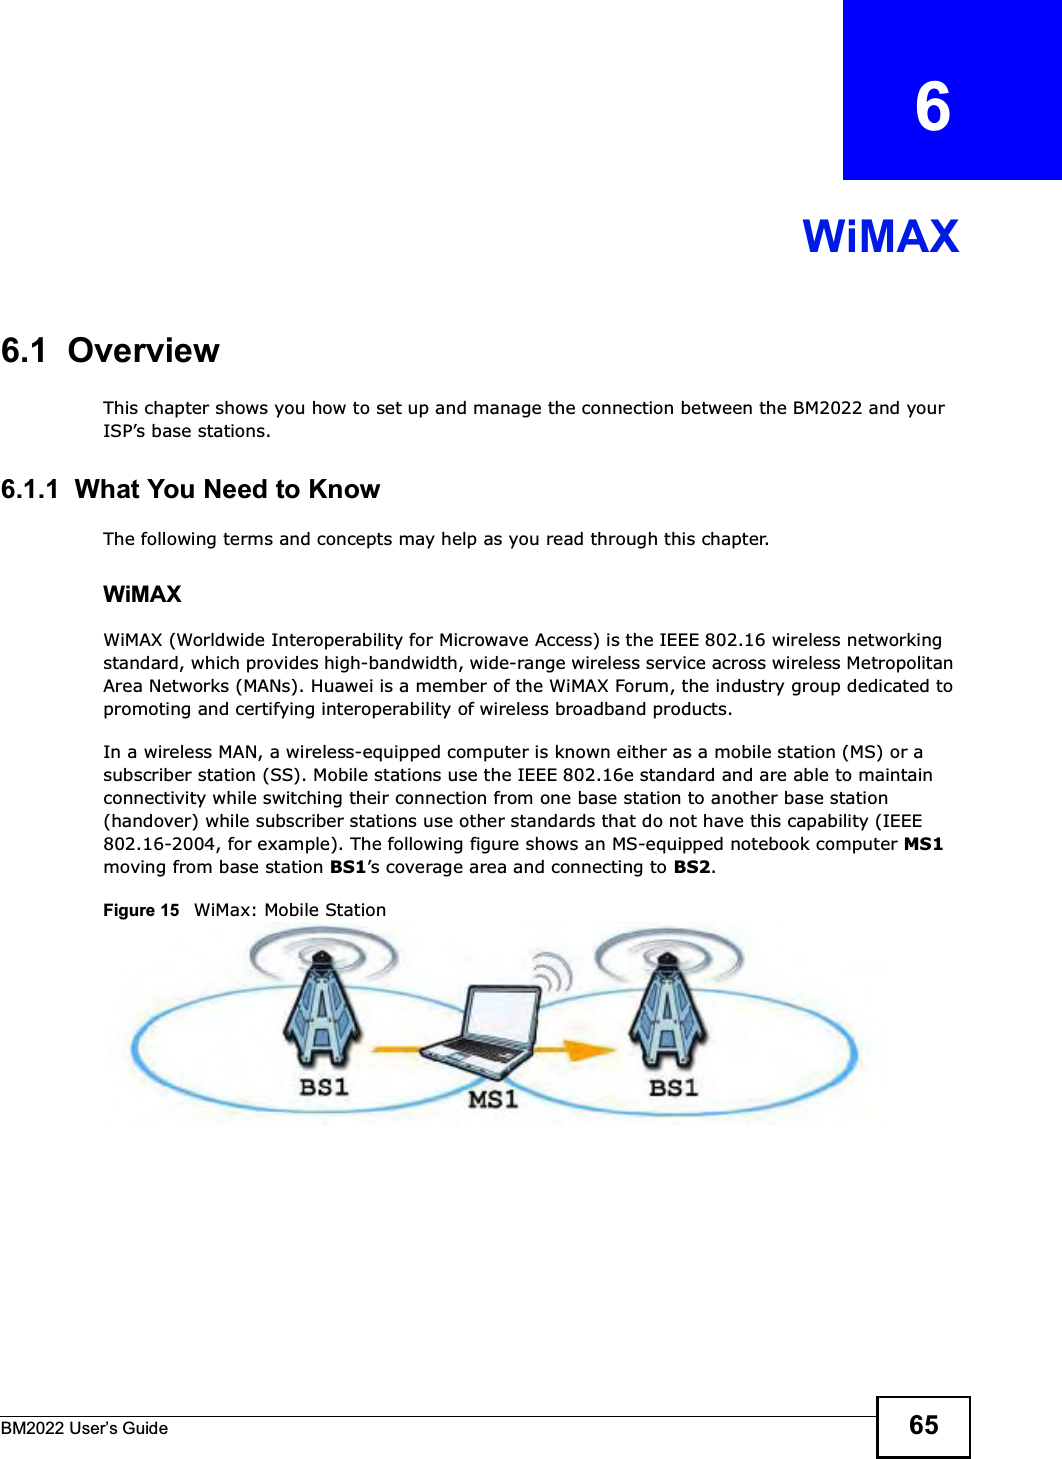 BM2022 Users Guide 65CHAPTER   6WiMAX6.1  OverviewThis chapter shows you how to set up and manage the connection between the BM2022 and your ISPs base stations.6.1.1  What You Need to KnowThe following terms and concepts may help as you read through this chapter.WiMAX WiMAX (Worldwide Interoperability for Microwave Access) is the IEEE 802.16 wireless networking standard, which provides high-bandwidth, wide-range wireless service across wireless Metropolitan Area Networks (MANs). Huawei is a member of the WiMAX Forum, the industry group dedicated to promoting and certifying interoperability of wireless broadband products.In a wireless MAN, a wireless-equipped computer is known either as a mobile station (MS) or a subscriber station (SS). Mobile stations use the IEEE 802.16e standard and are able to maintain connectivity while switching their connection from one base station to another base station (handover) while subscriber stations use other standards that do not have this capability (IEEE 802.16-2004, for example). The following figure shows an MS-equipped notebook computer MS1 moving from base station BS1s coverage area and connecting to BS2.Figure 15   WiMax: Mobile Station